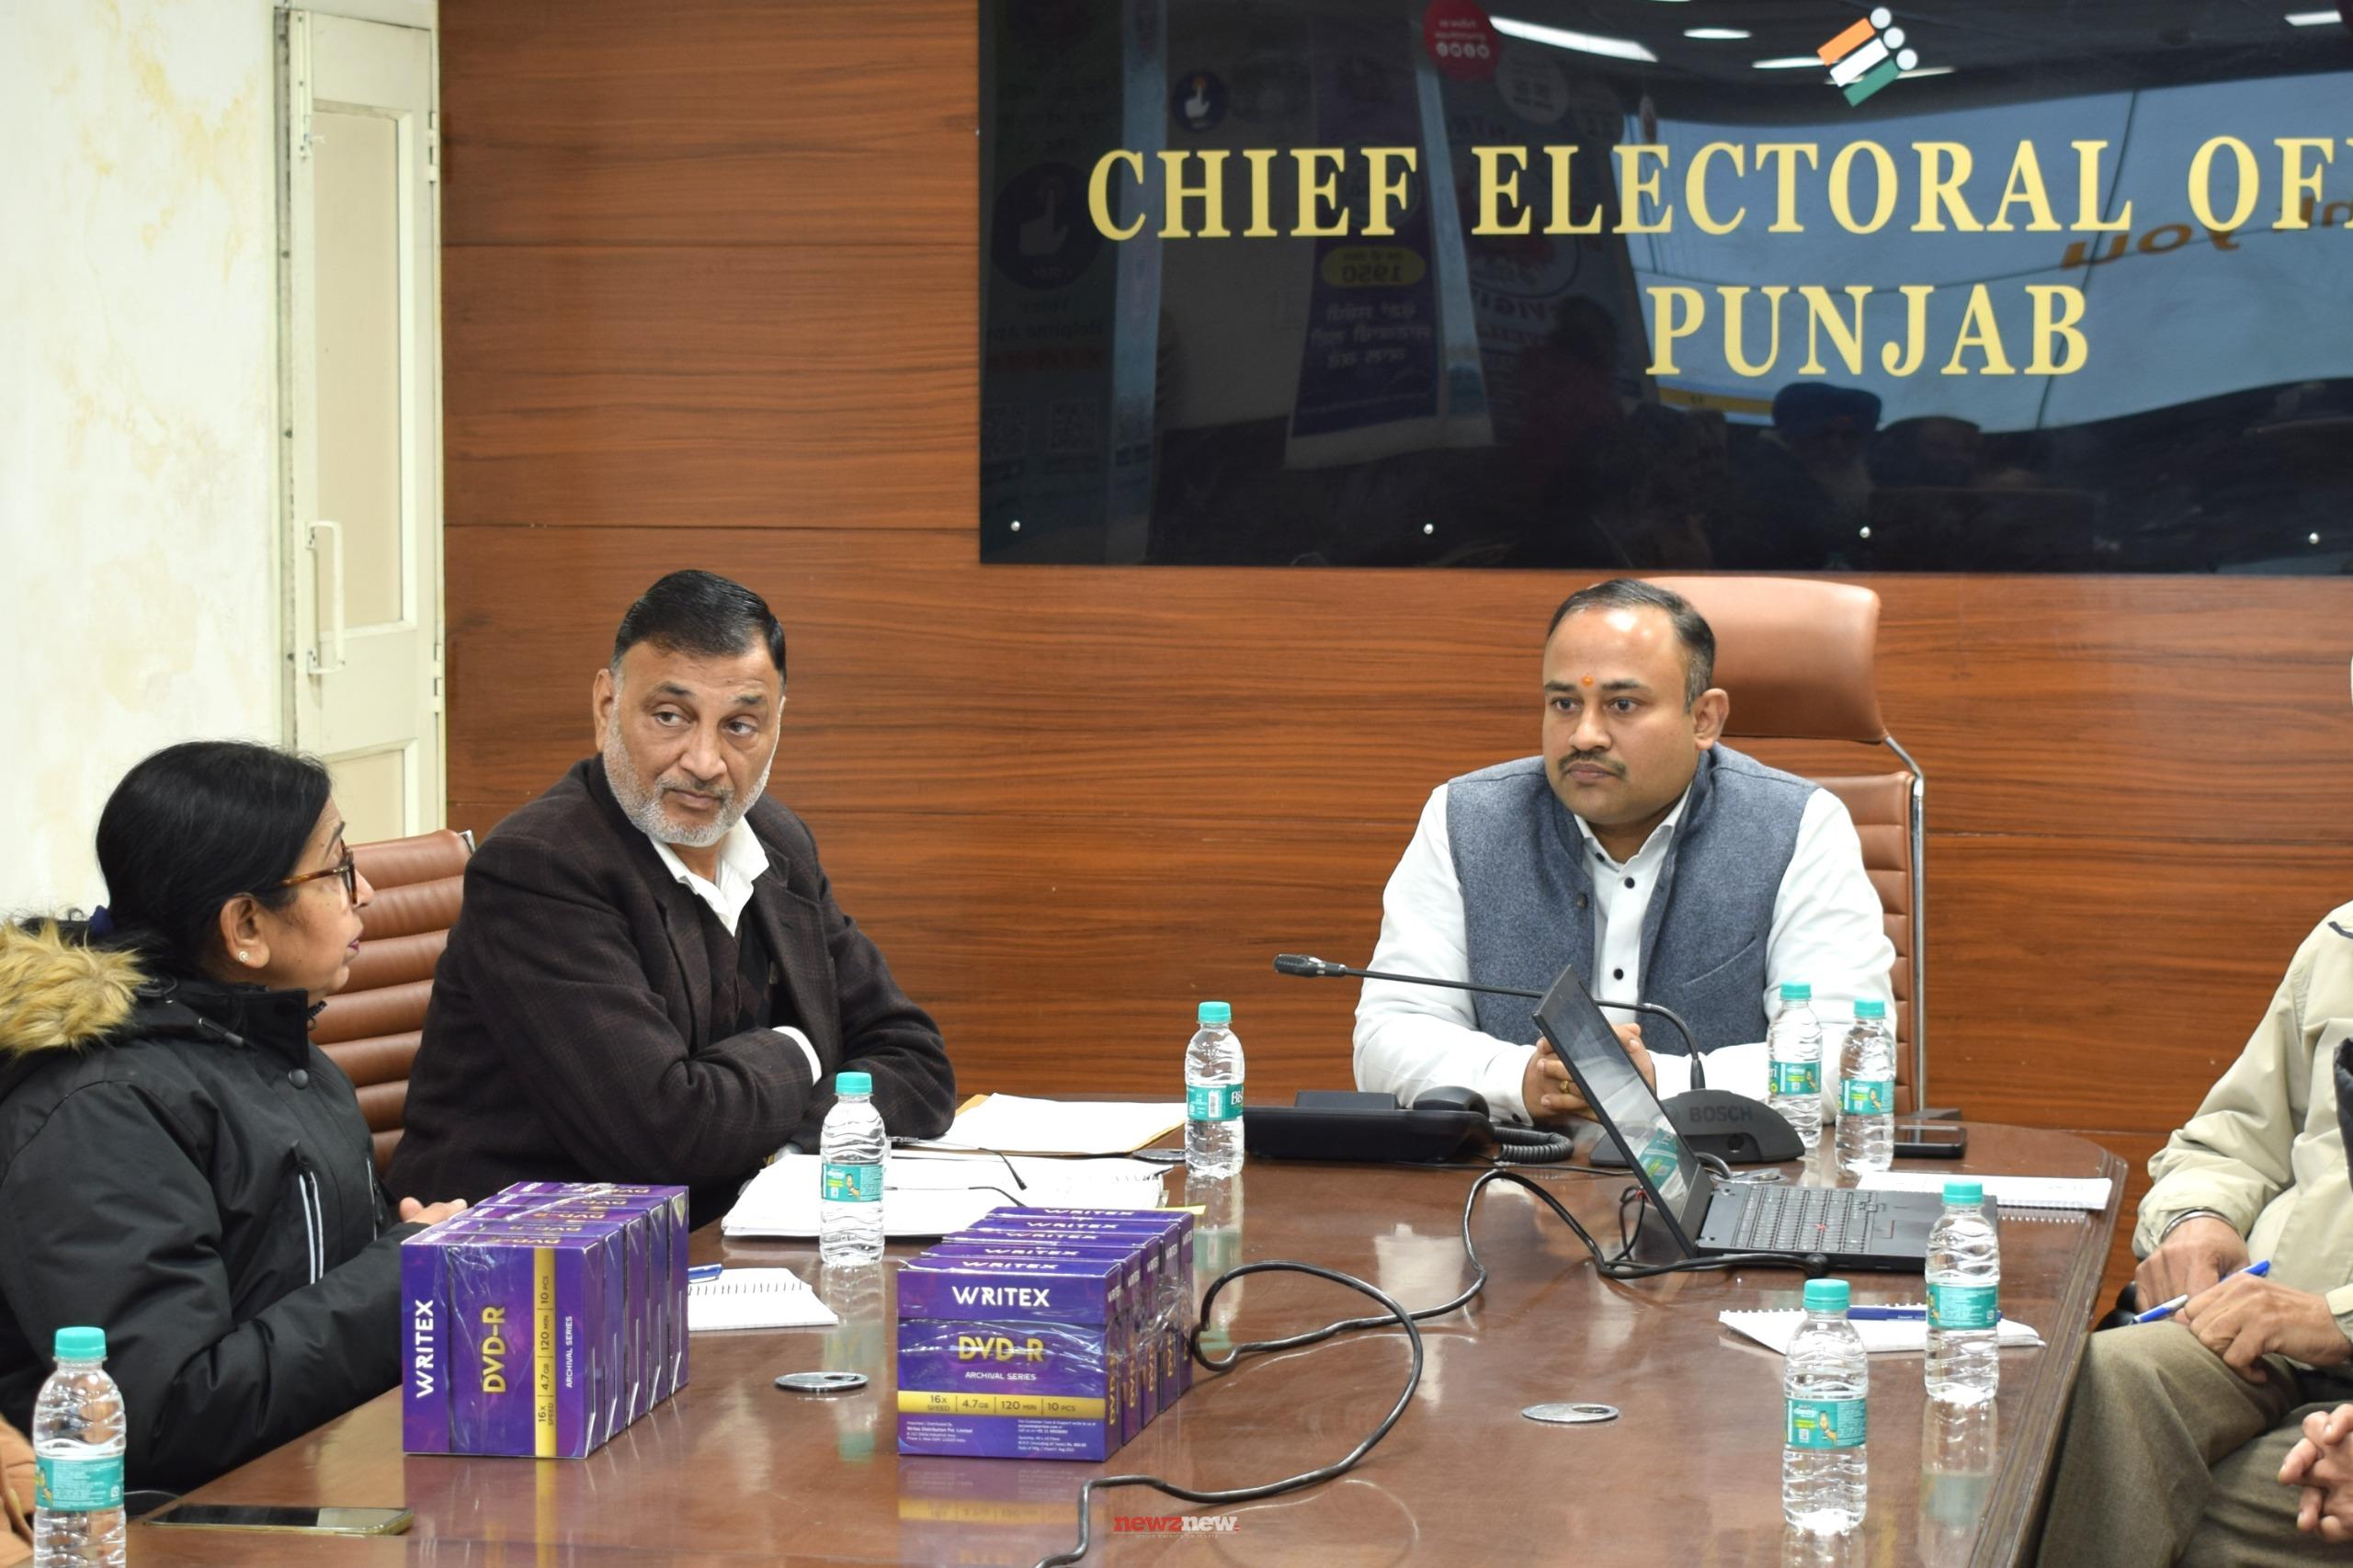 CEO Punjab holds a meeting with political parties to handover the CDs of final publication of electoral